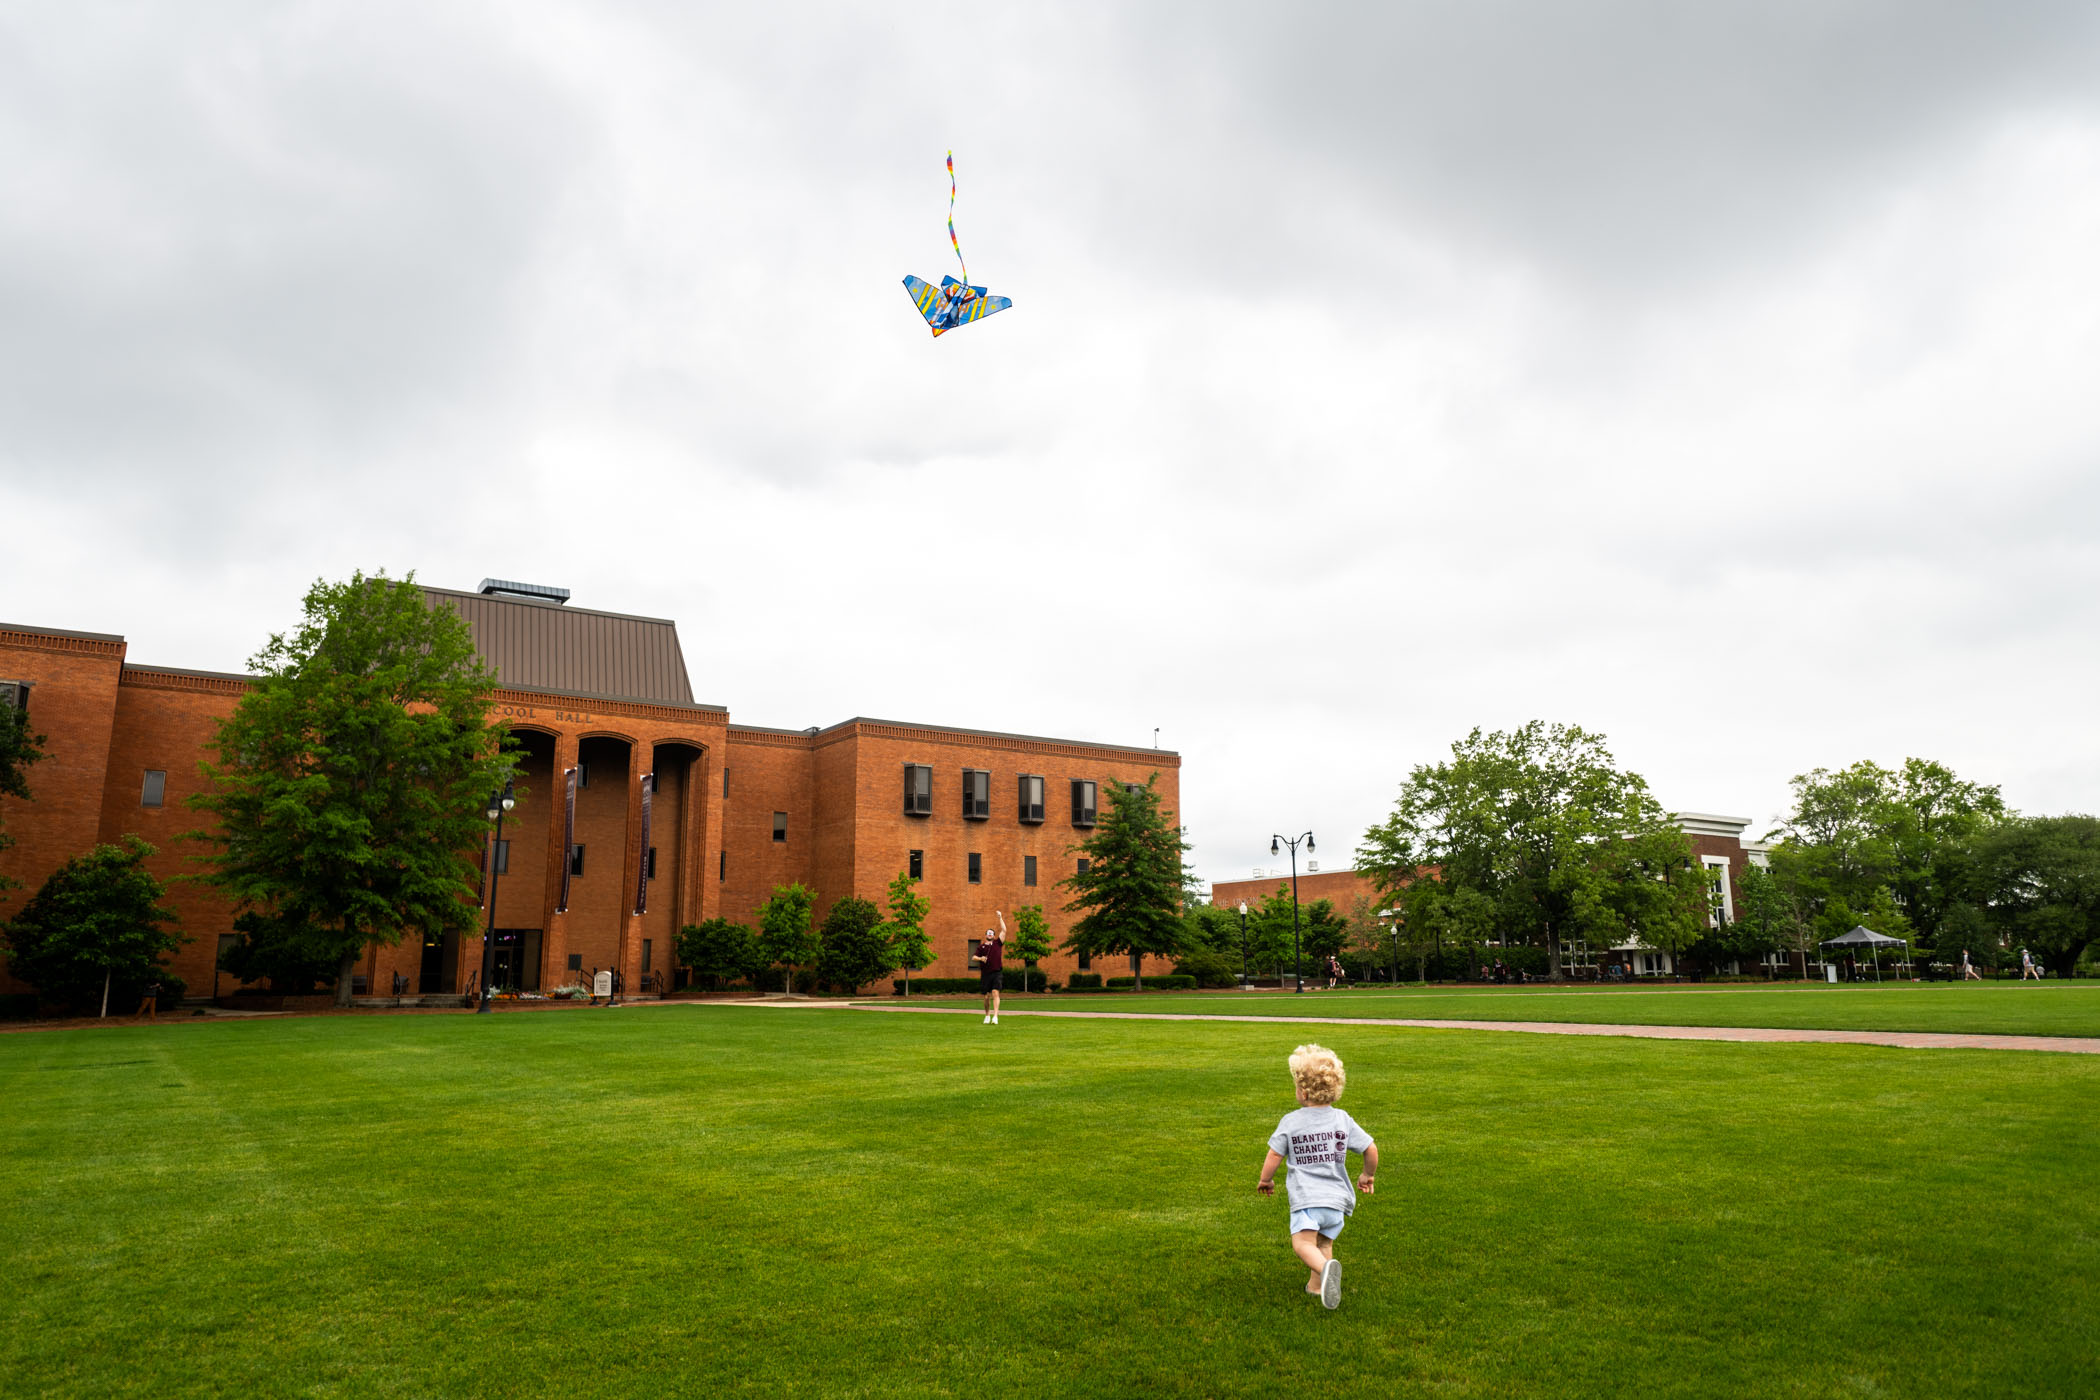 Two-year old Stafford Christensen of Madison chases a colorful, plane-shaped kite flown by his father, Brett, across the Drill Field Friday [April 19]. After a day of traveling, the family enjoys a calm moment on campus before the fanfare of Super Bulldog Weekend. 